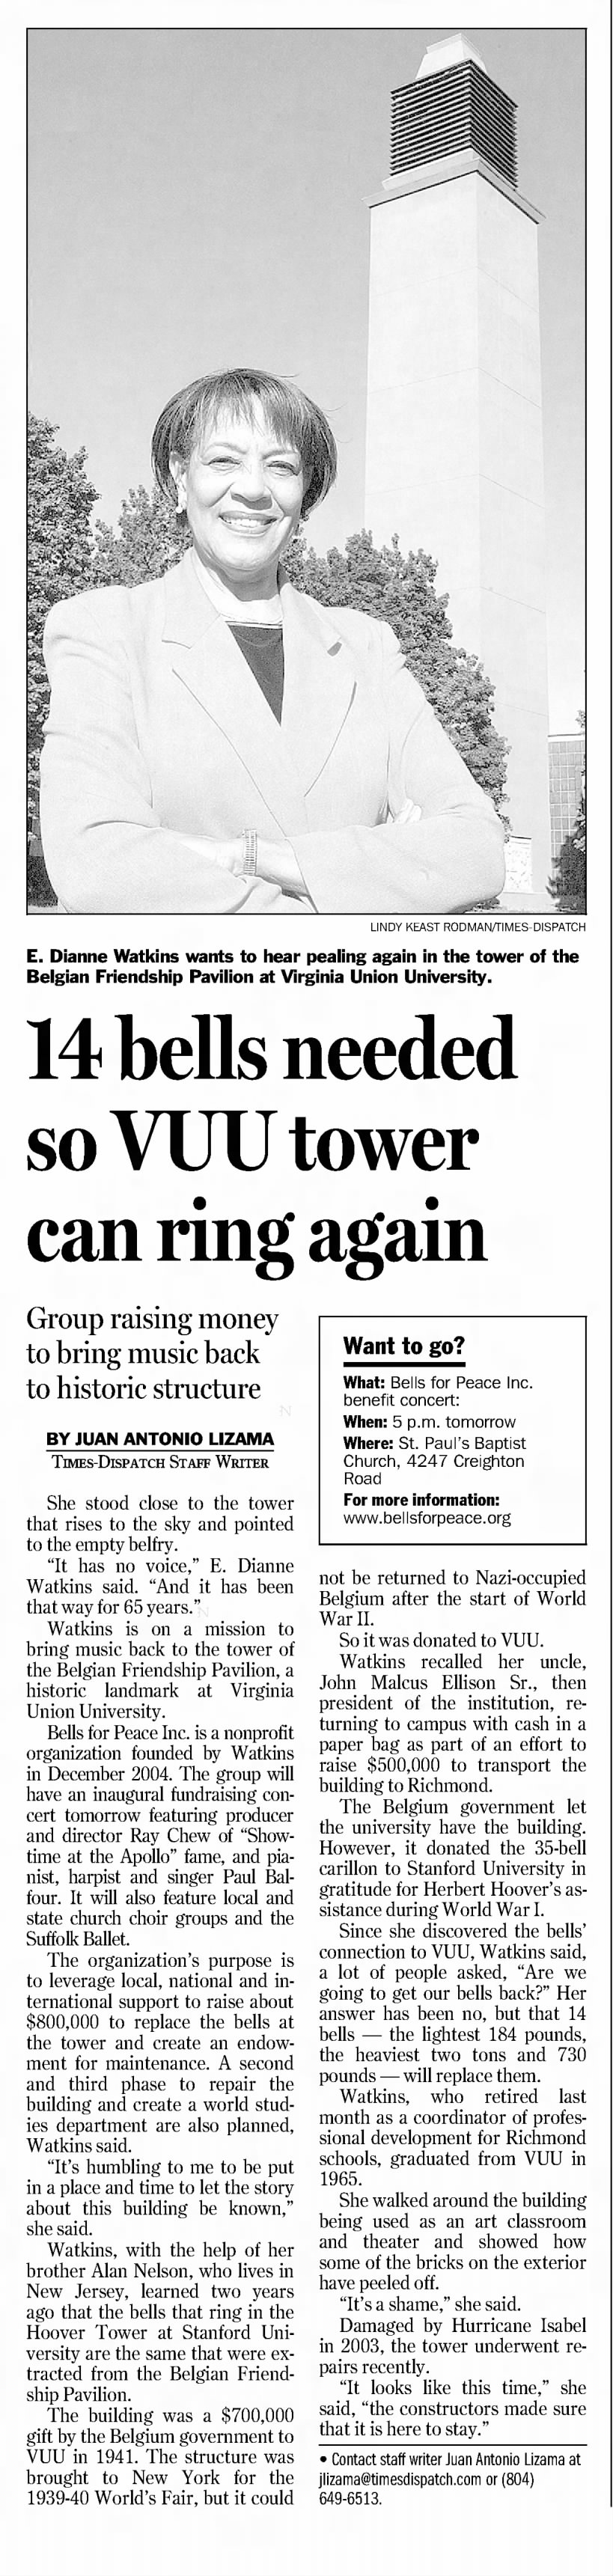 14 bells needed so VUU tower can ring again